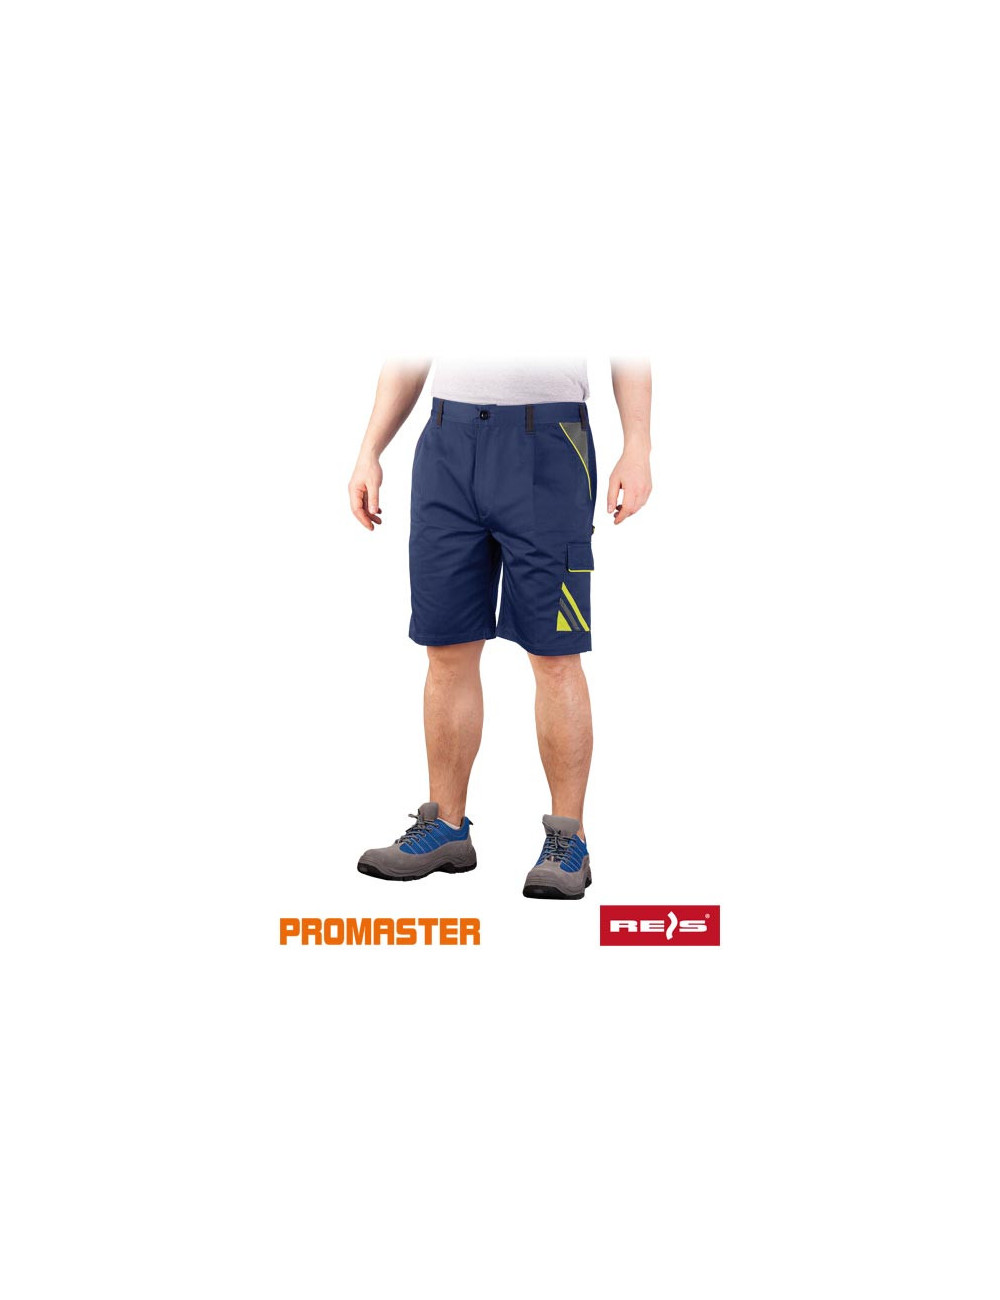 Protective waist trousers - short pro-ts gys navy-yellow-gray Reis